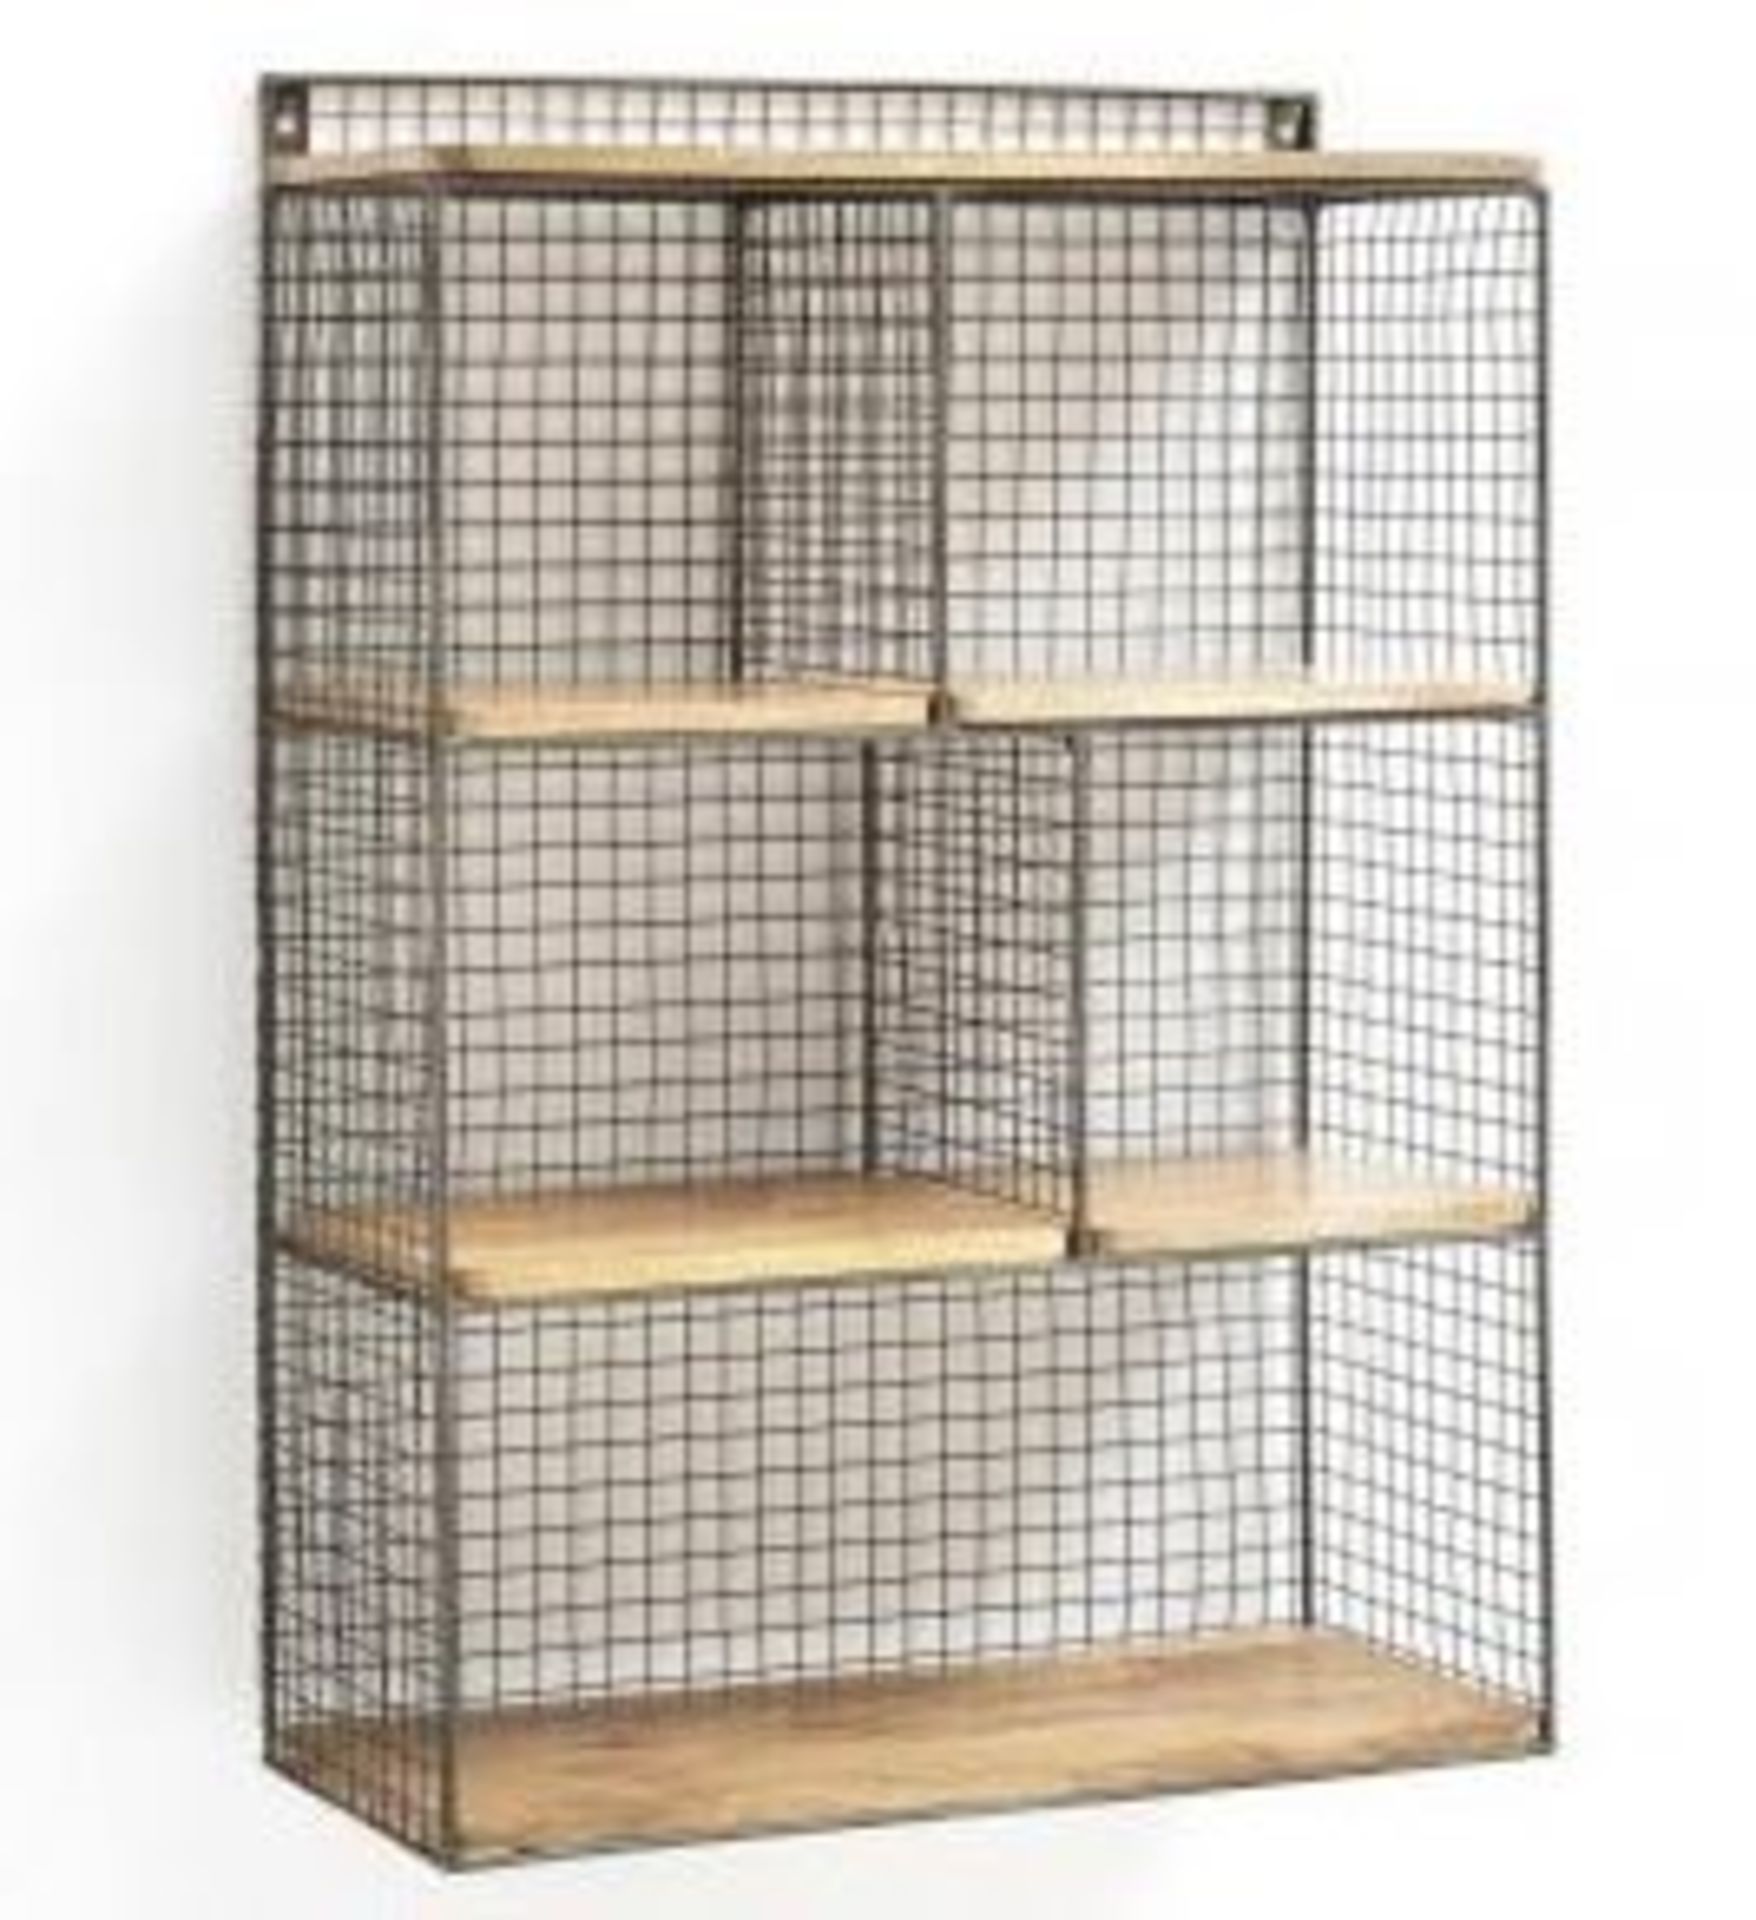 1 GRADE A BOXED DESIGNER AREGLO PIGEONHOLE WALL SHELF IN WOOD AND METAL / RRP £110.00 (PUBLIC